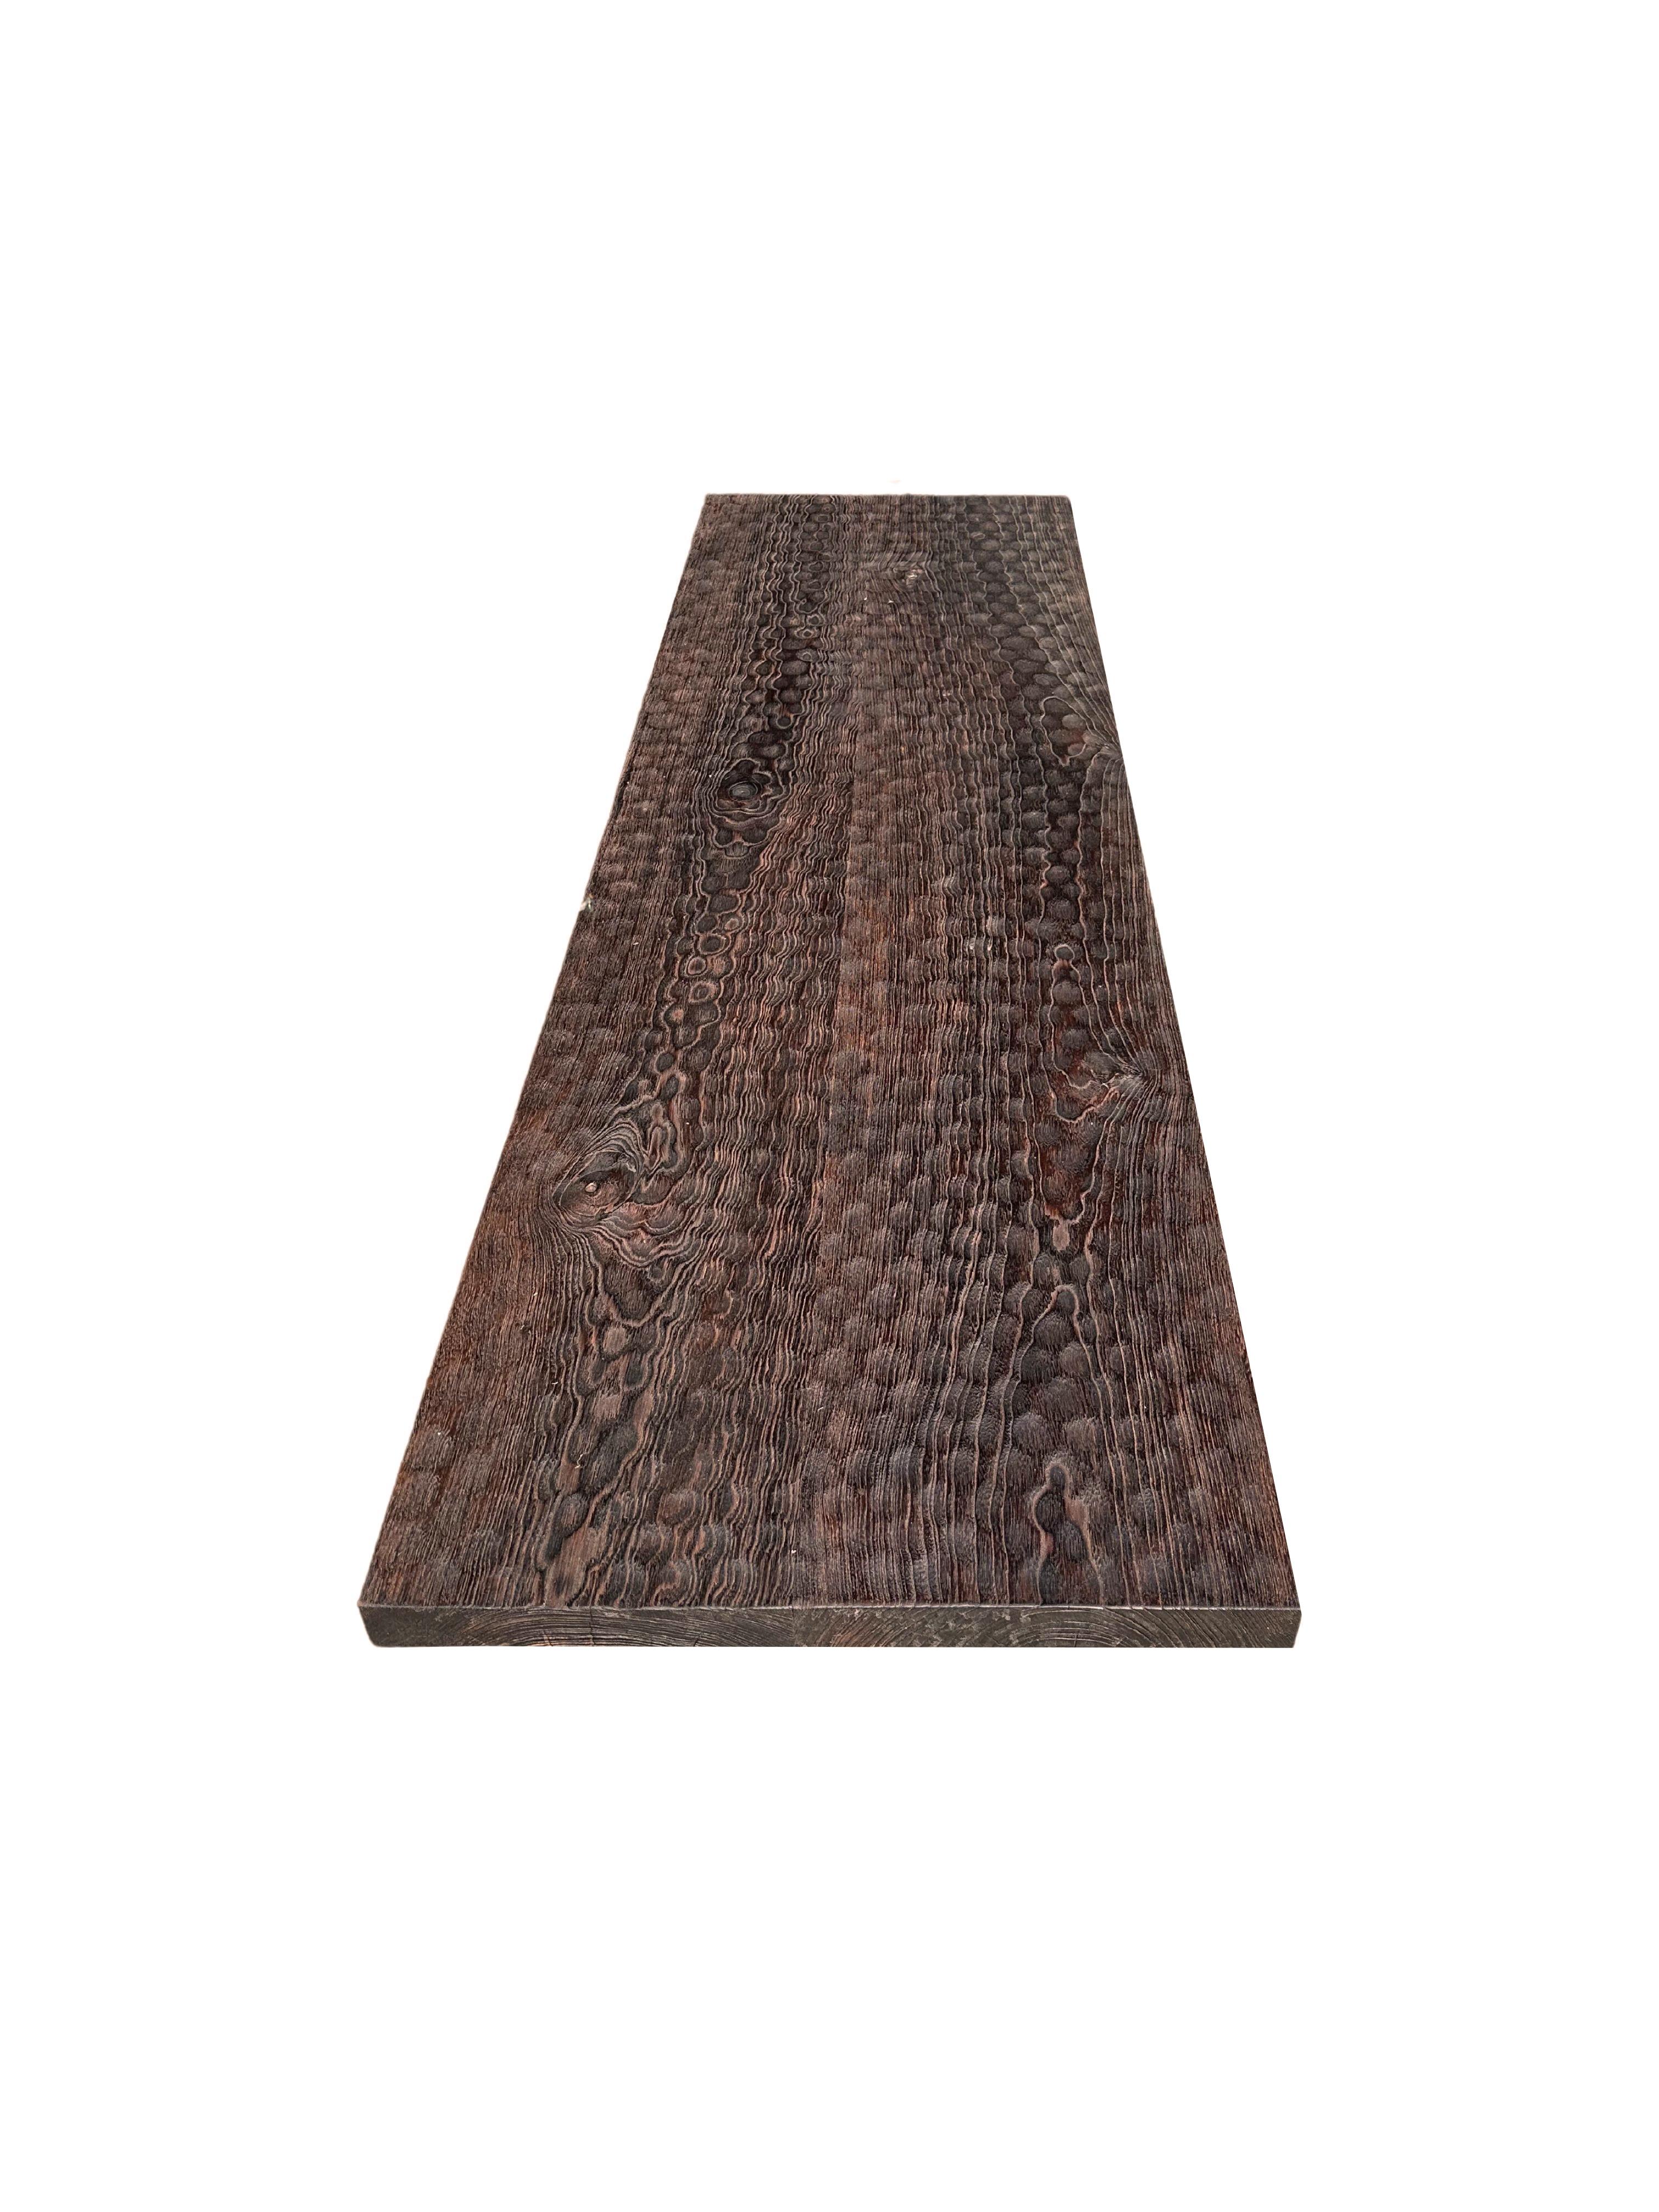 Suar Wood Table Hand-Hewn Detailing Espresso Finish, Modern Organic In New Condition For Sale In Jimbaran, Bali